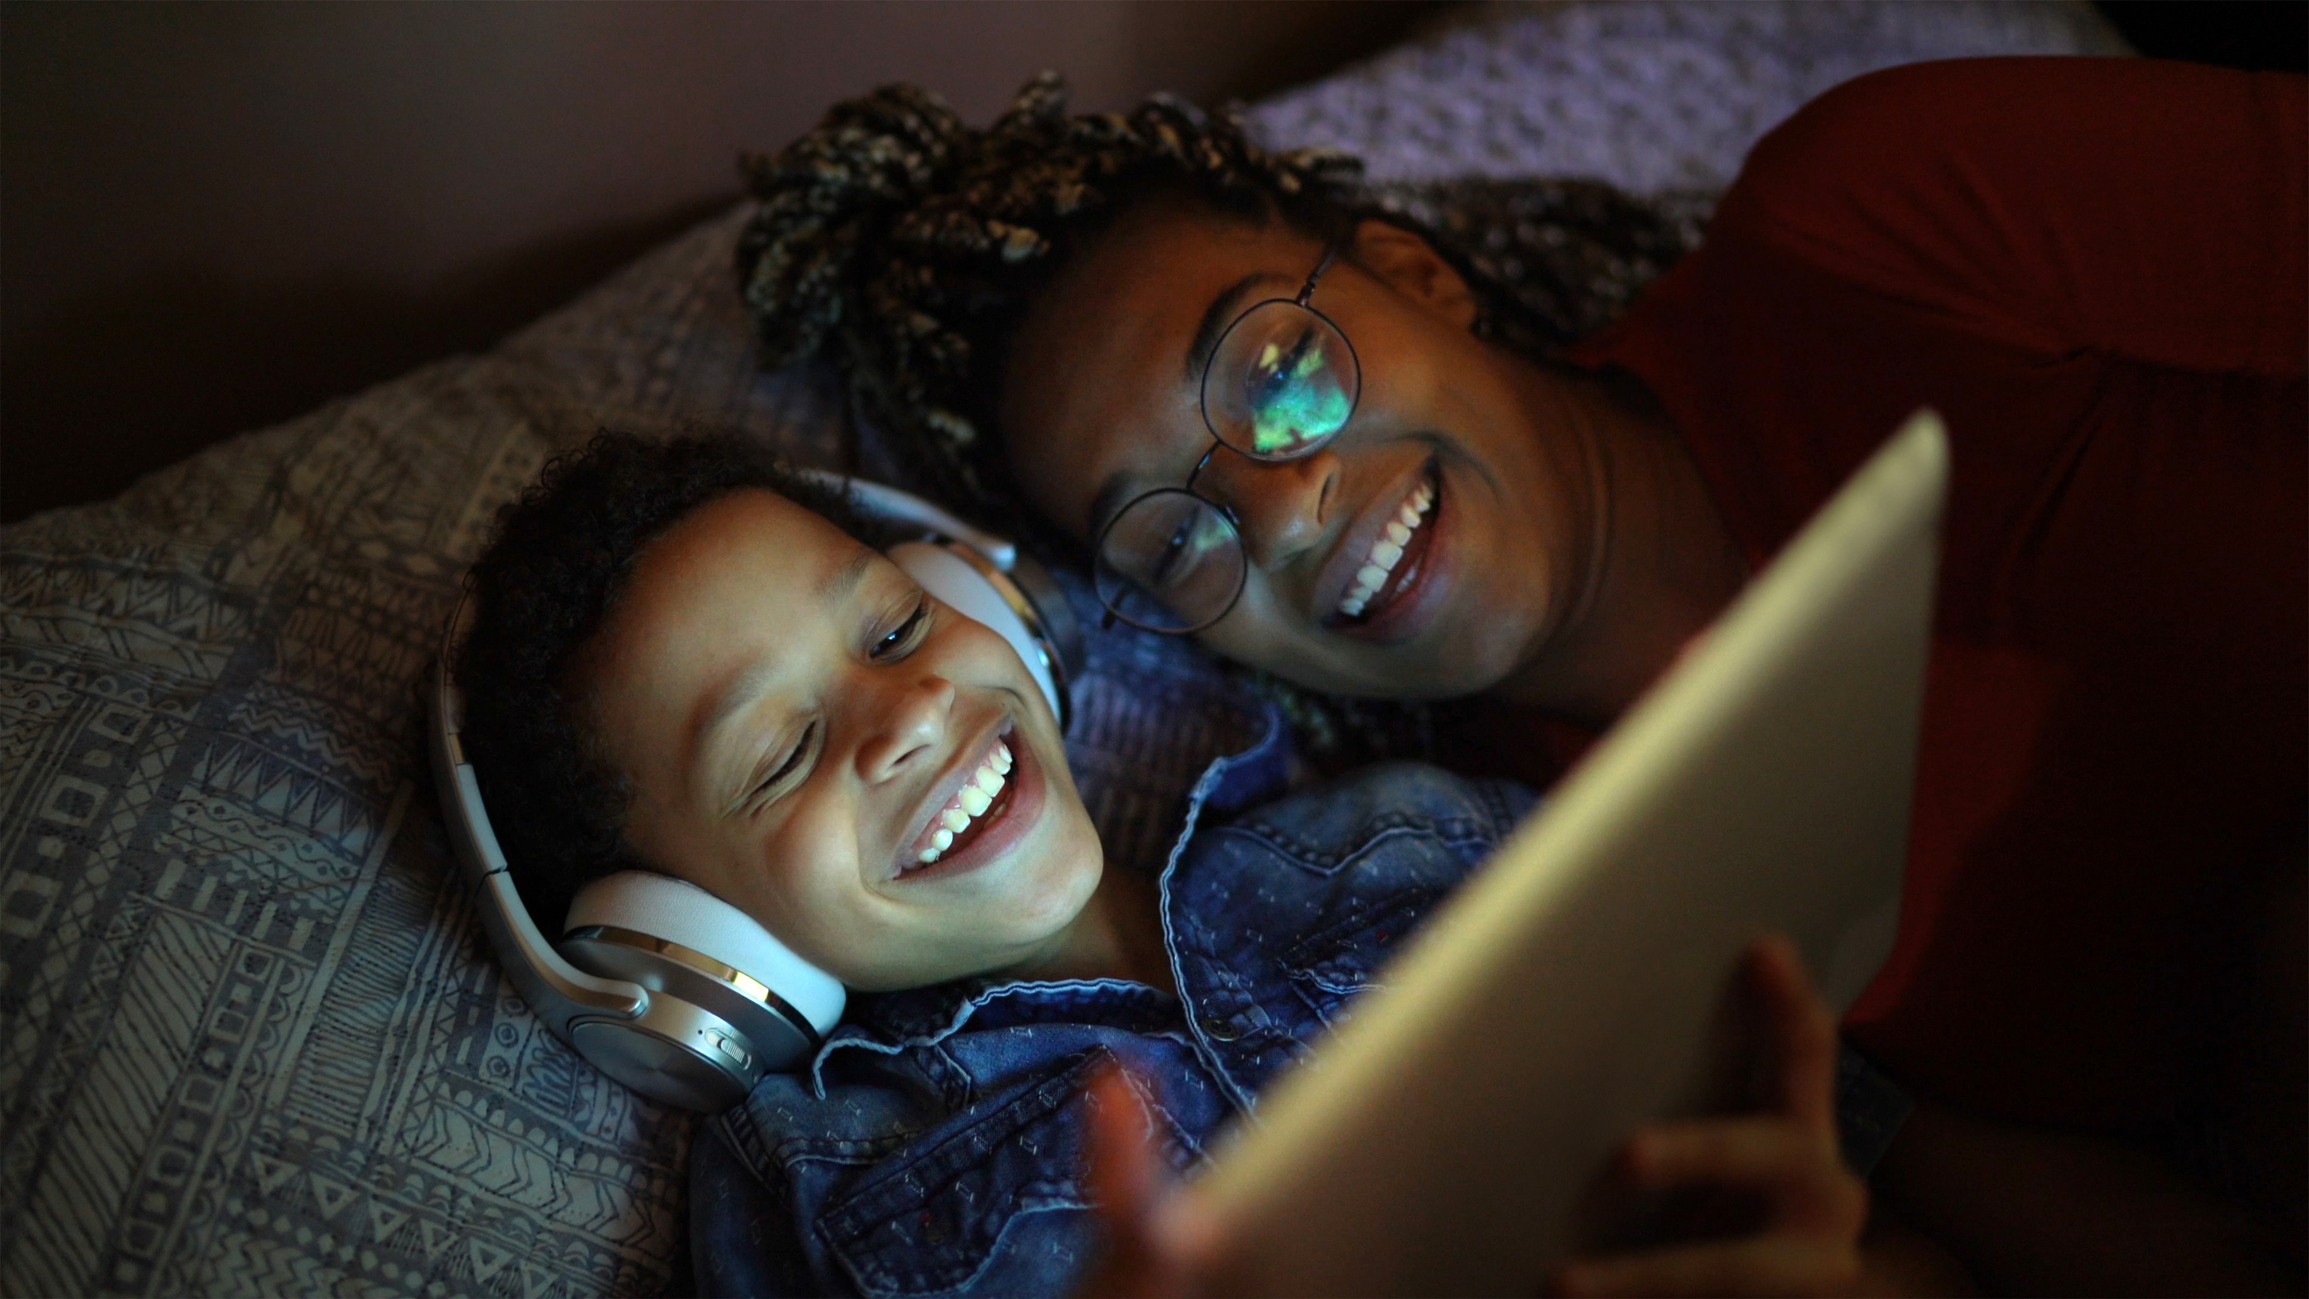 Parent and child smiling together while using a tablet device.